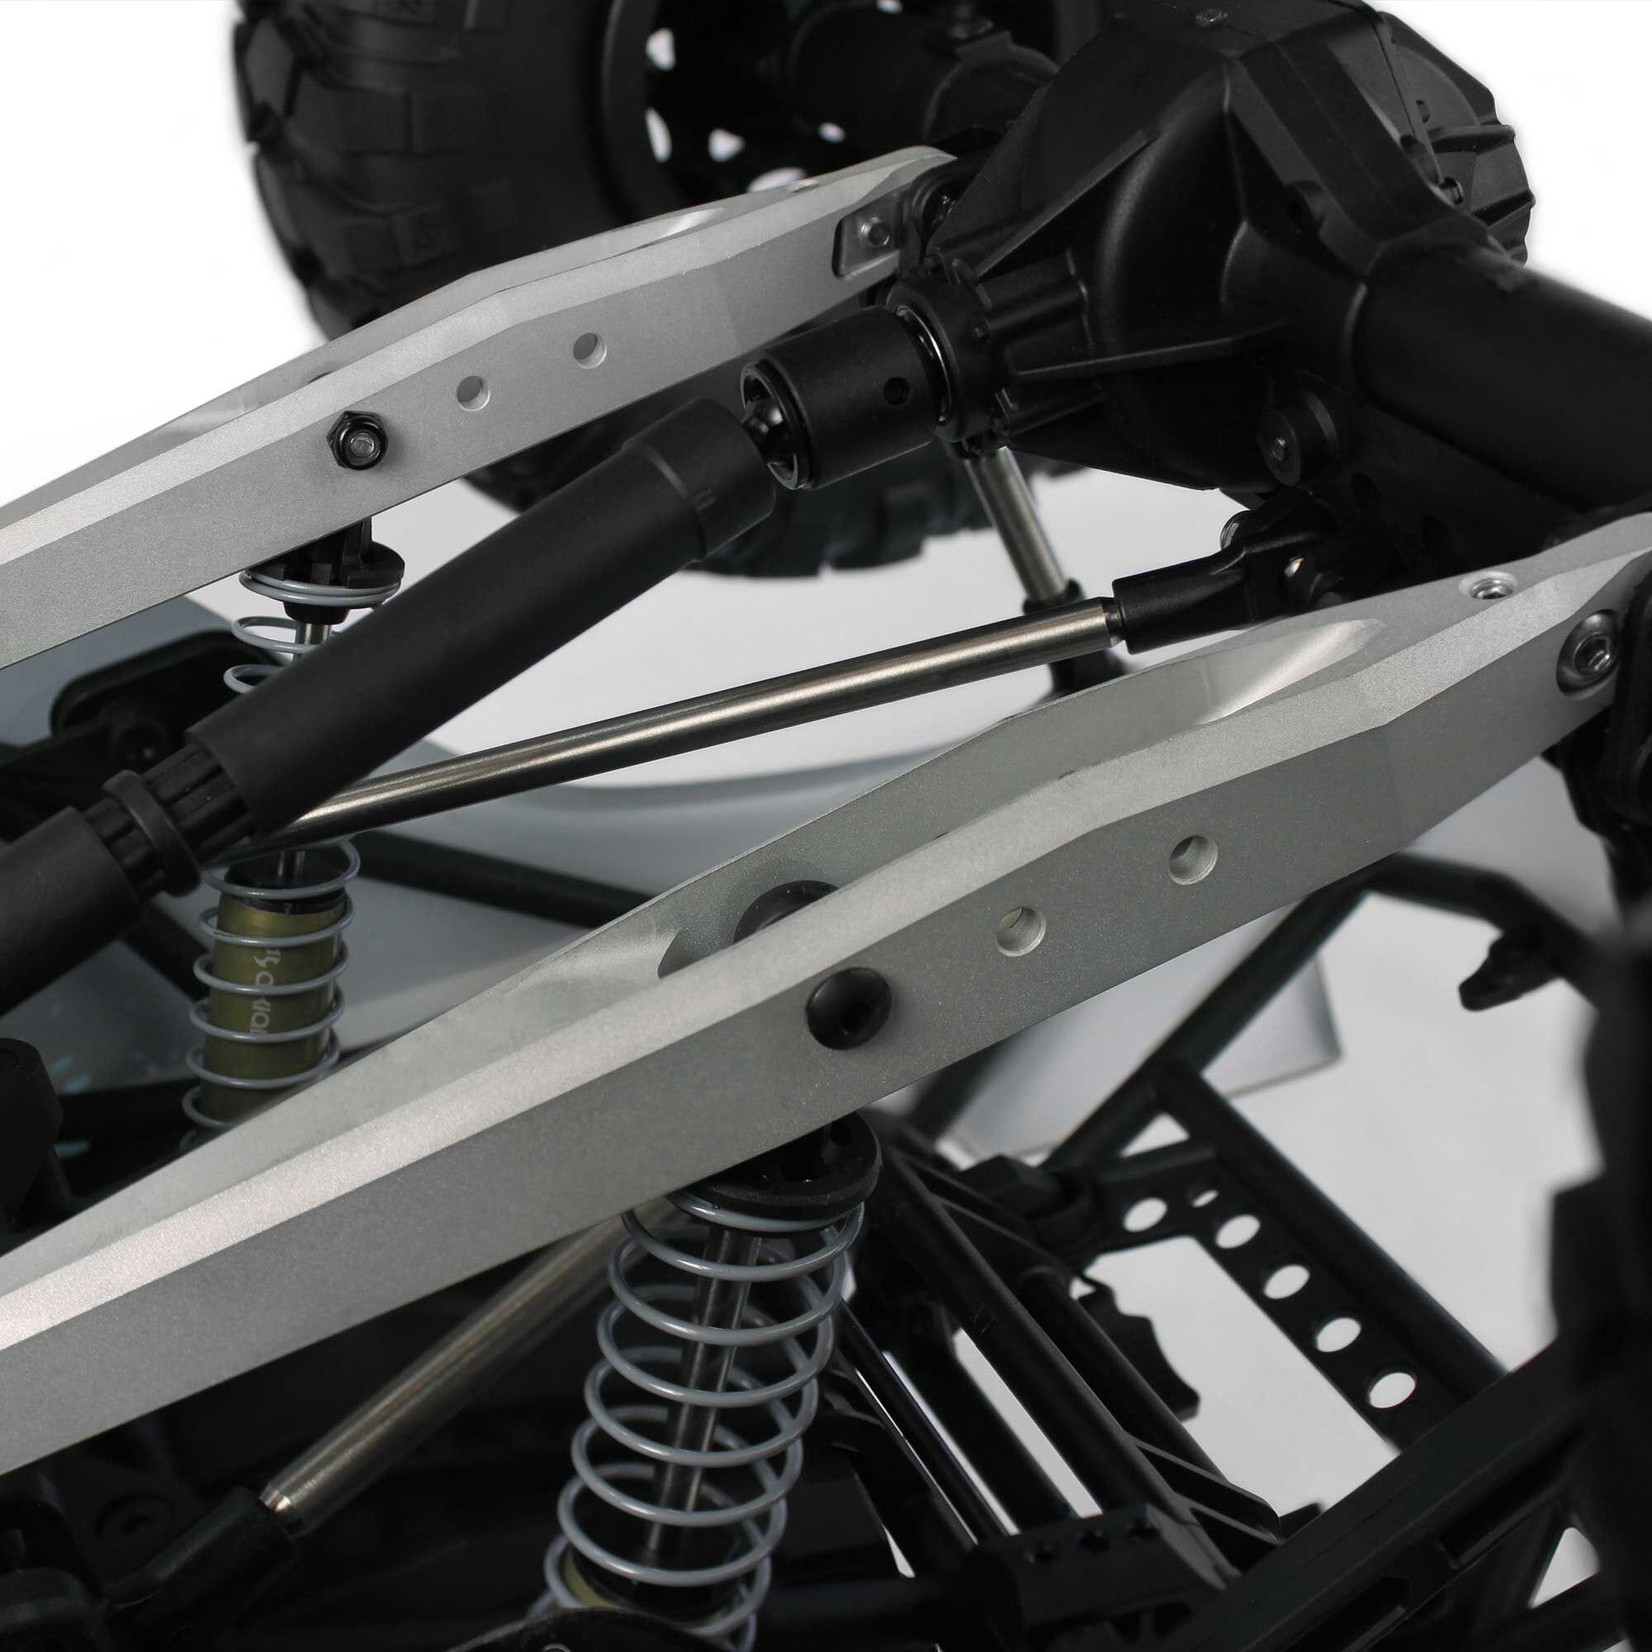 Vanquish Products Trailing Arms, Black Anodized: Yeti